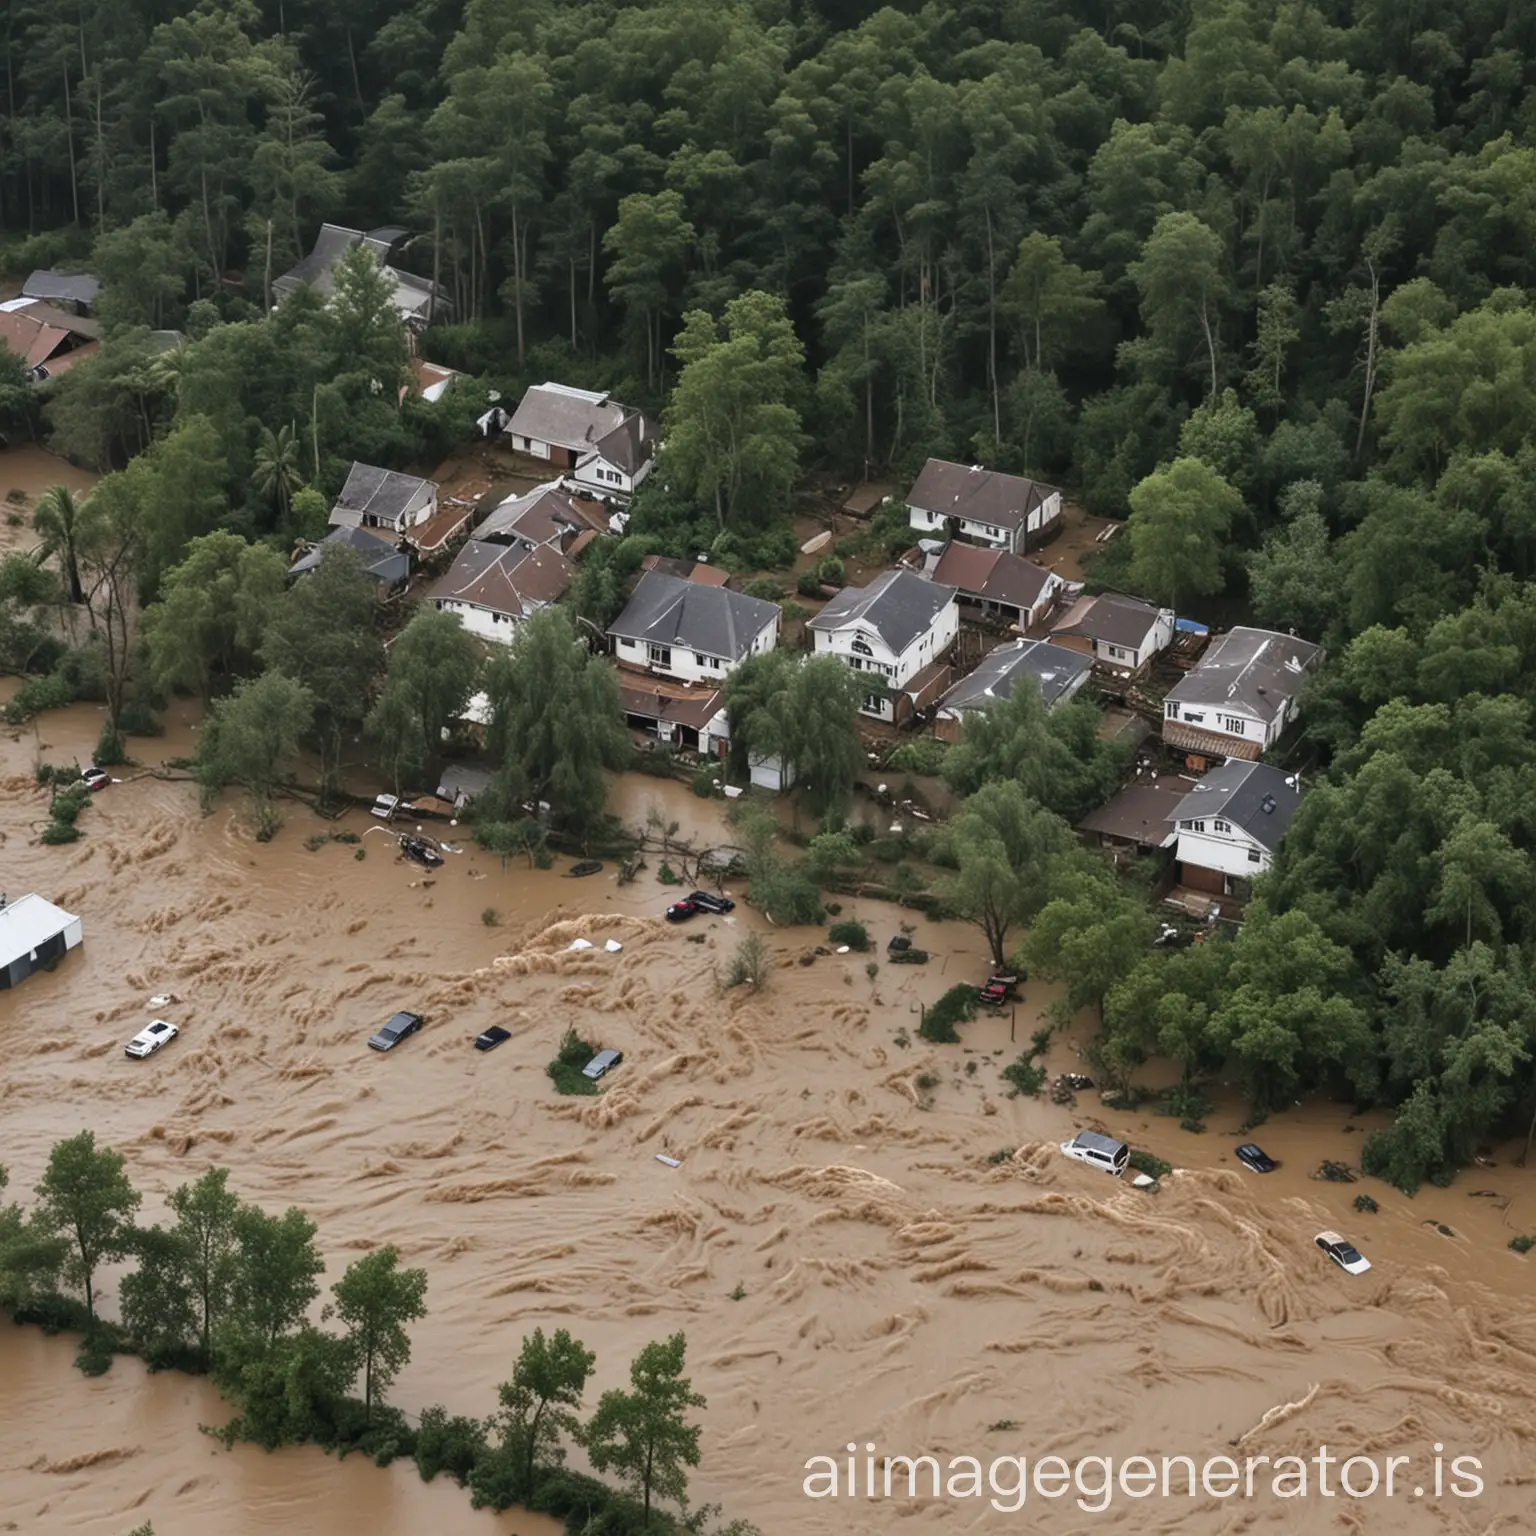 Devastating-Floods-Homes-Surrounded-by-Clearcut-Forests-with-Distraught-Residents